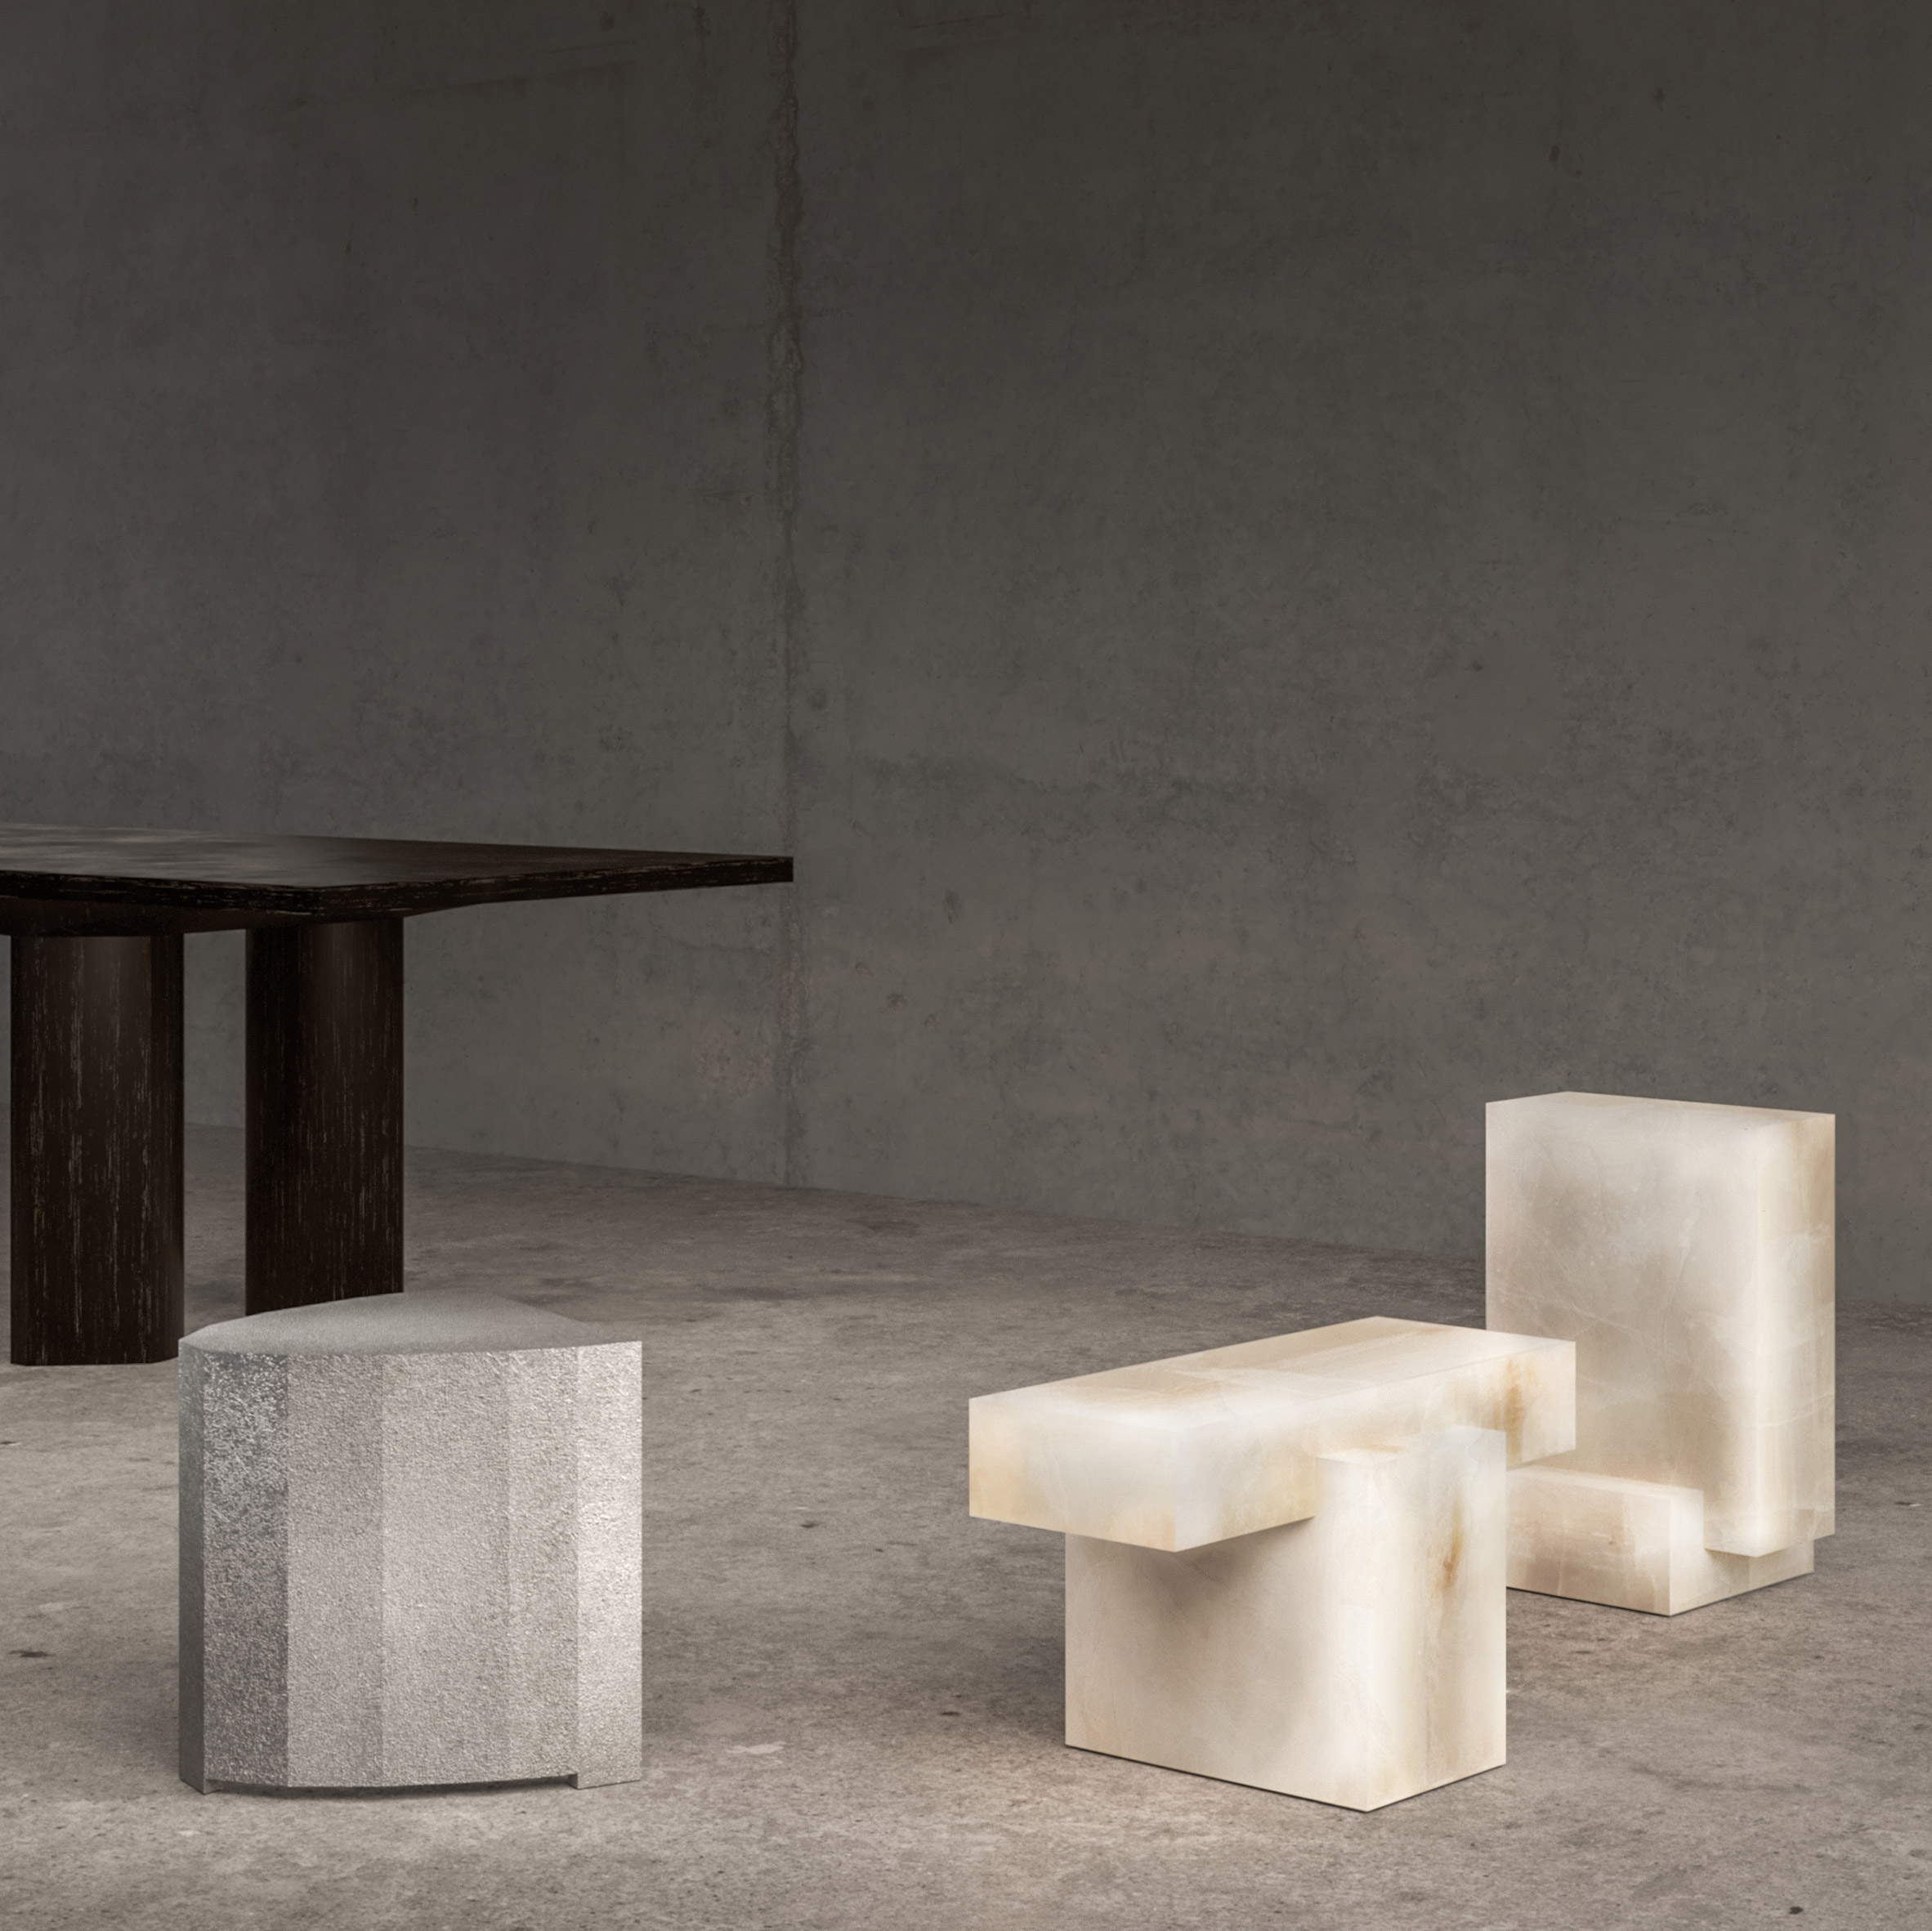 Geometric furniture made from stone